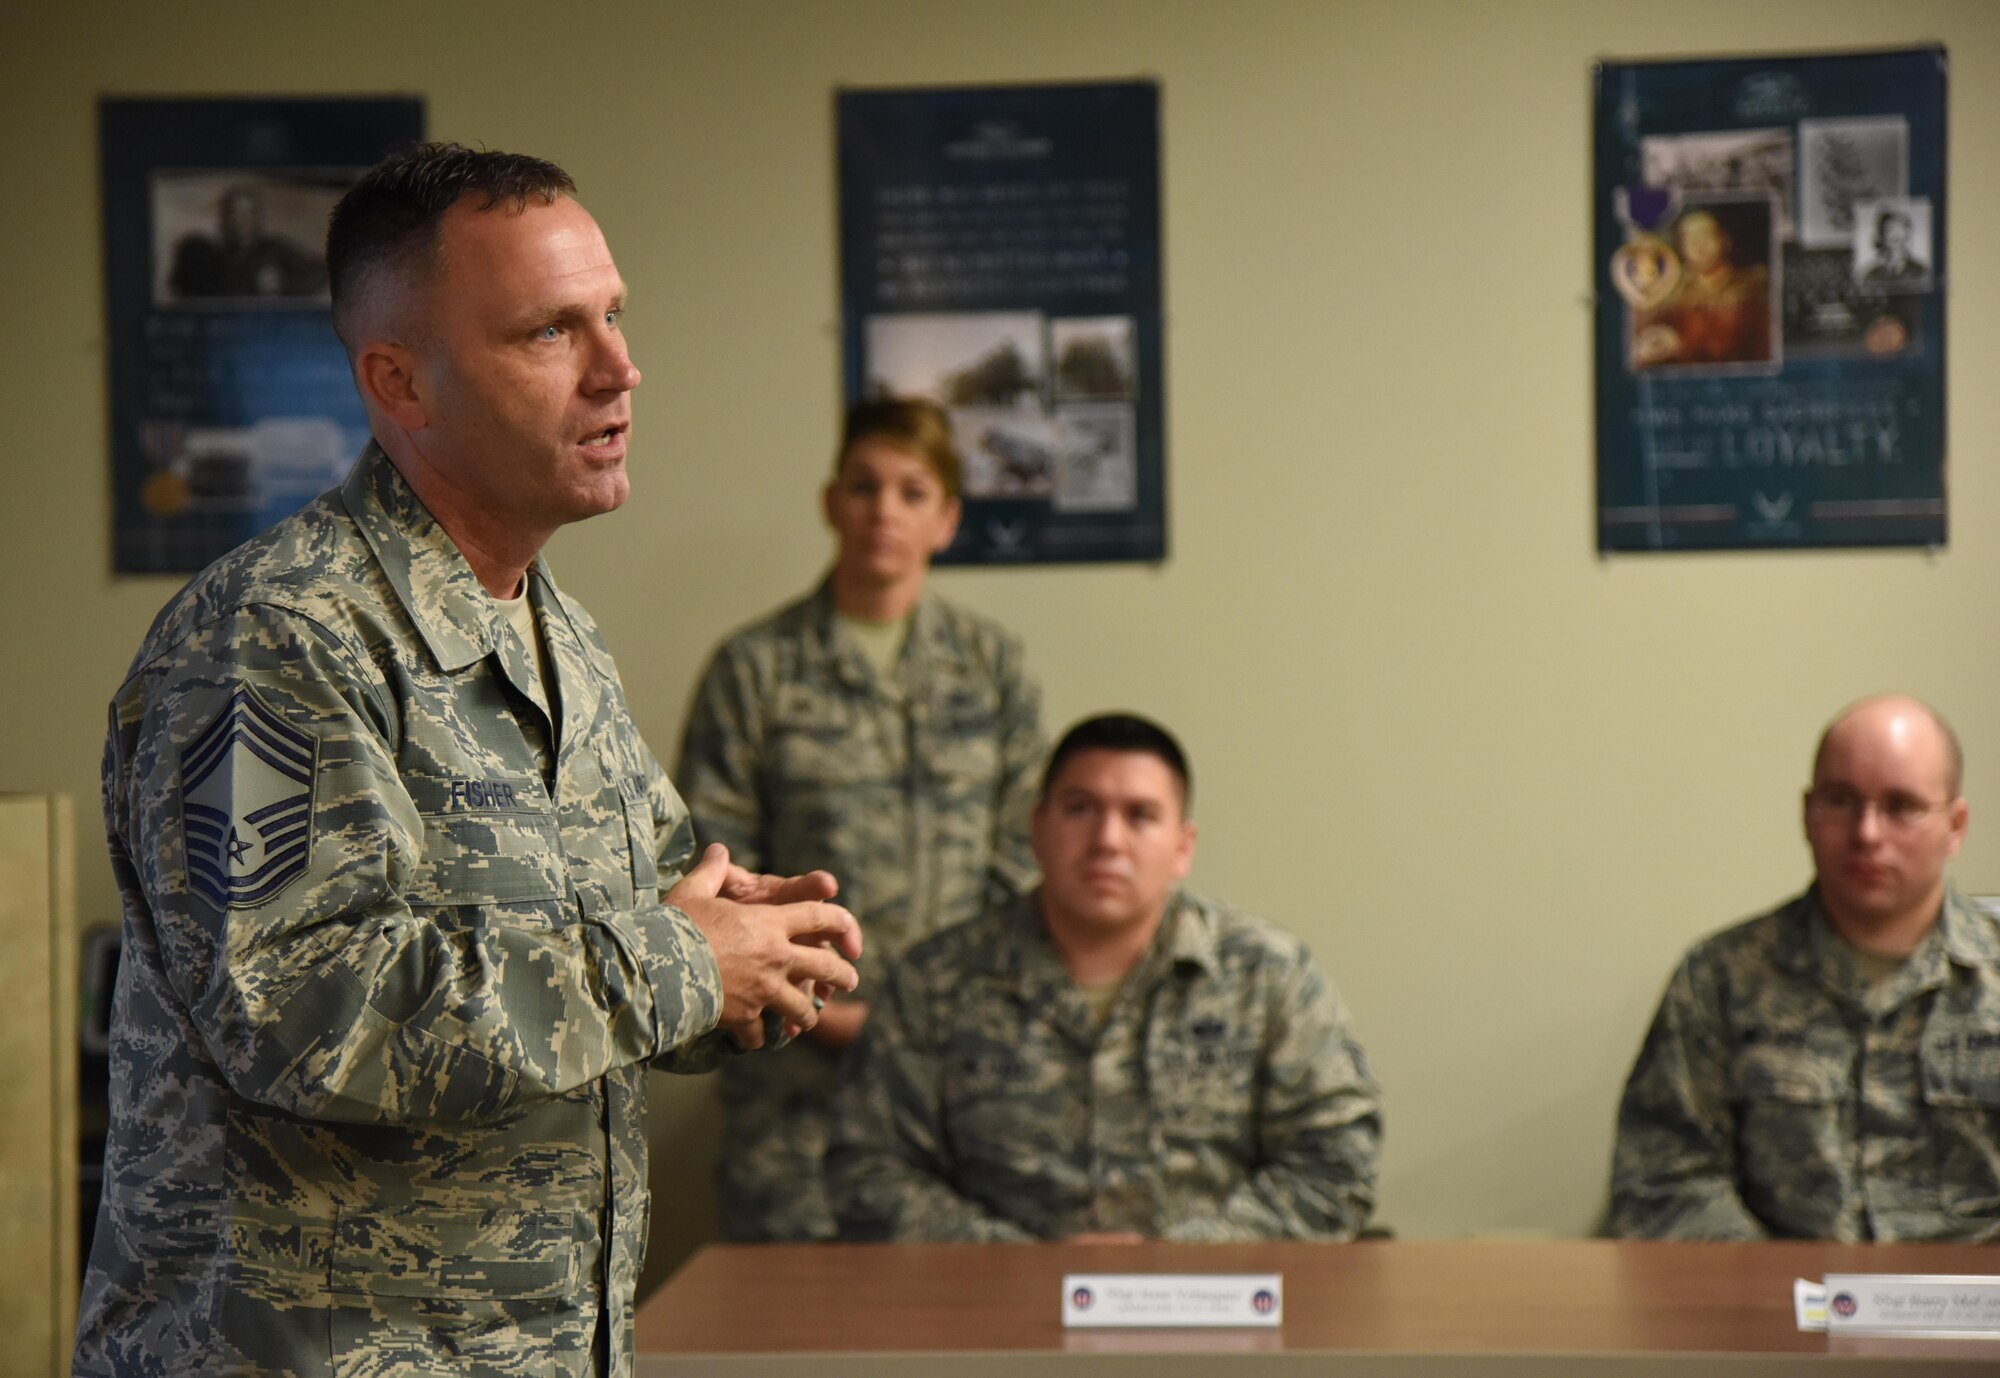 Chief Master Sgt. Anthony Fisher, 81st Training Group superintendent, delivers welcoming remarks to 81st Training Support Squadron Military Training Leader Course students at Allee Hall Nov. 29, 2016, on Keesler Air Force Base, Miss. This is the second class to attend the schoolhouse’s new four-week course curriculum, which was upped from two weeks and boasts a higher level of hands-on, practical application than its previous format. (U.S. Air Force photo by Kemberly Groue)